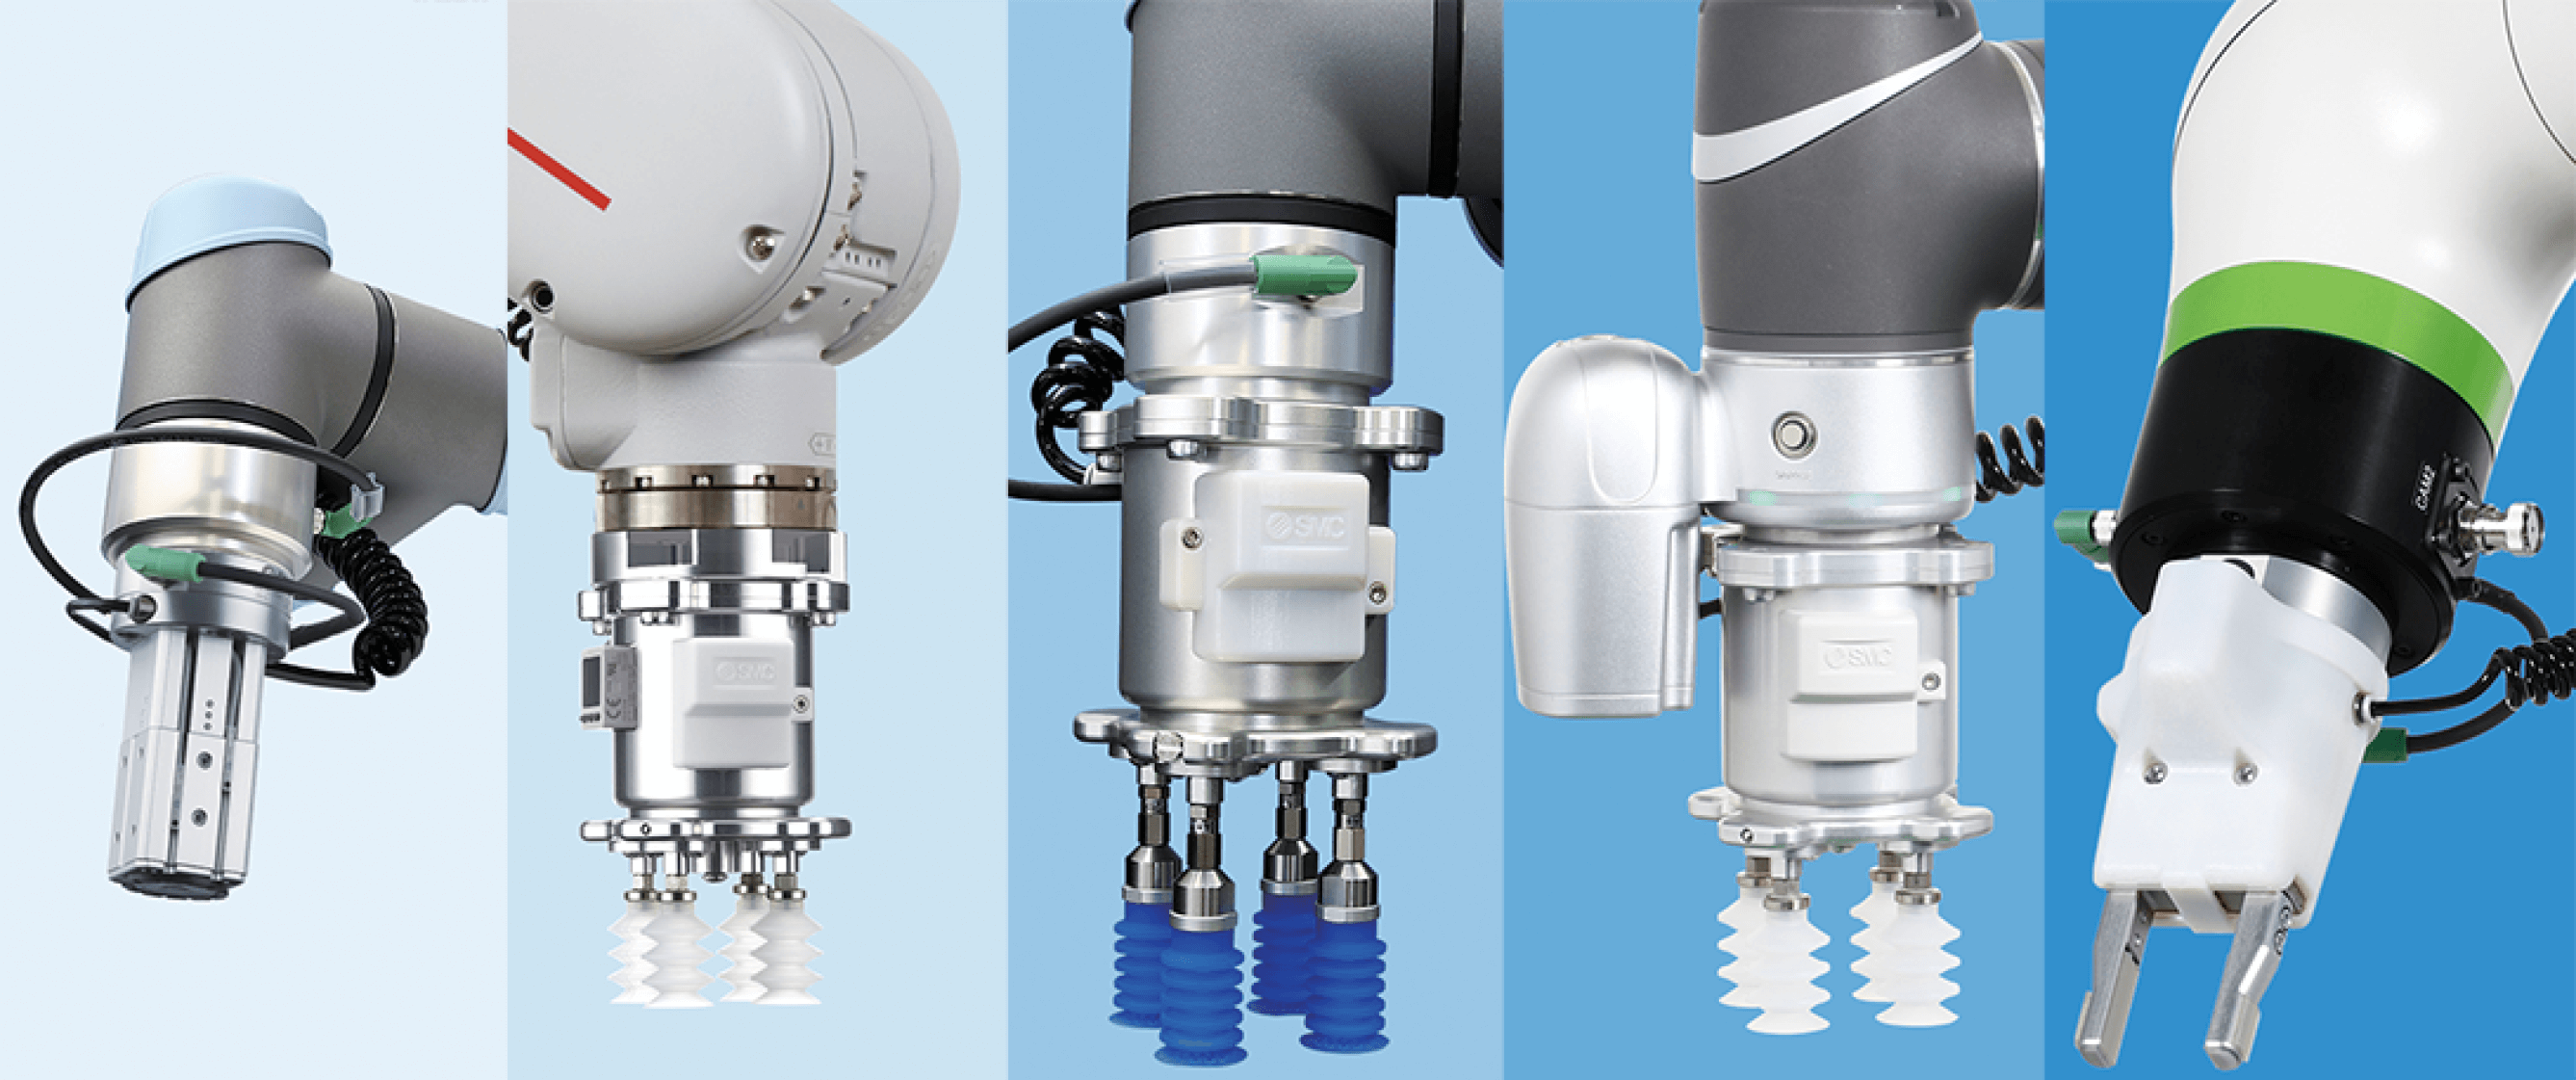 Collaborative Robot Grippers